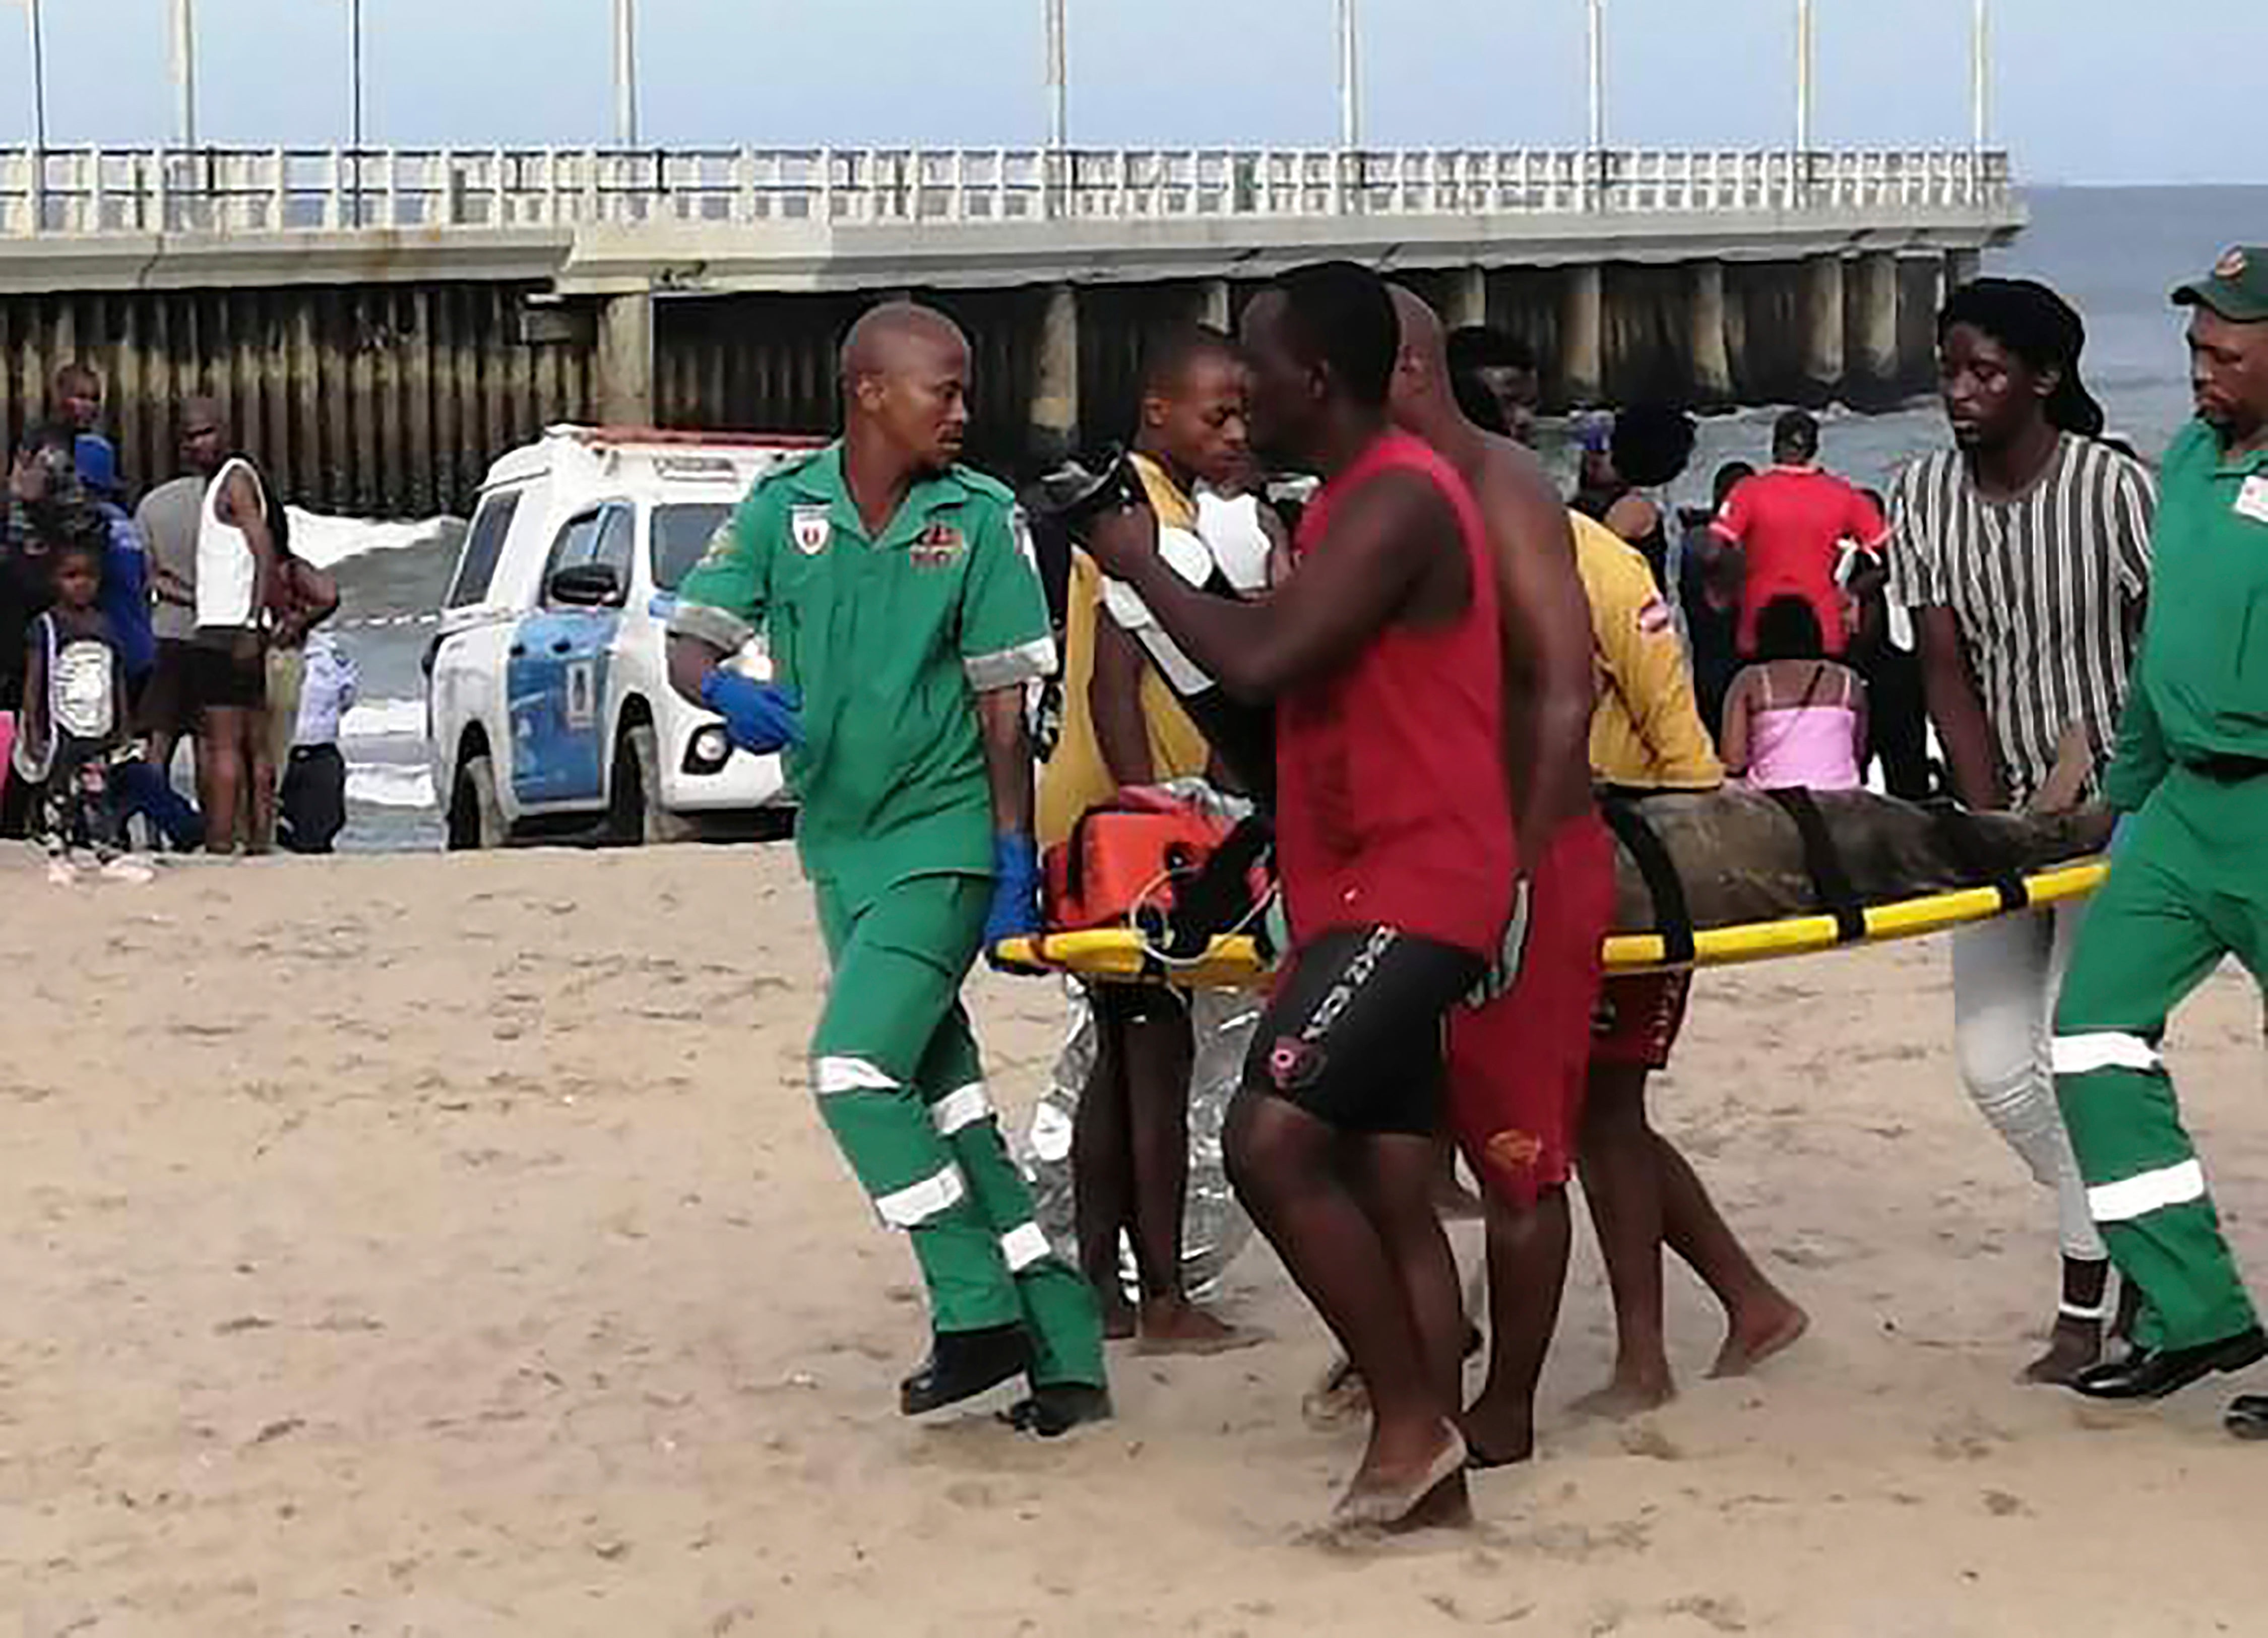 Paramedics carry a person on a stretcher on the Bay of Plenty Beach in Durban, South Africa